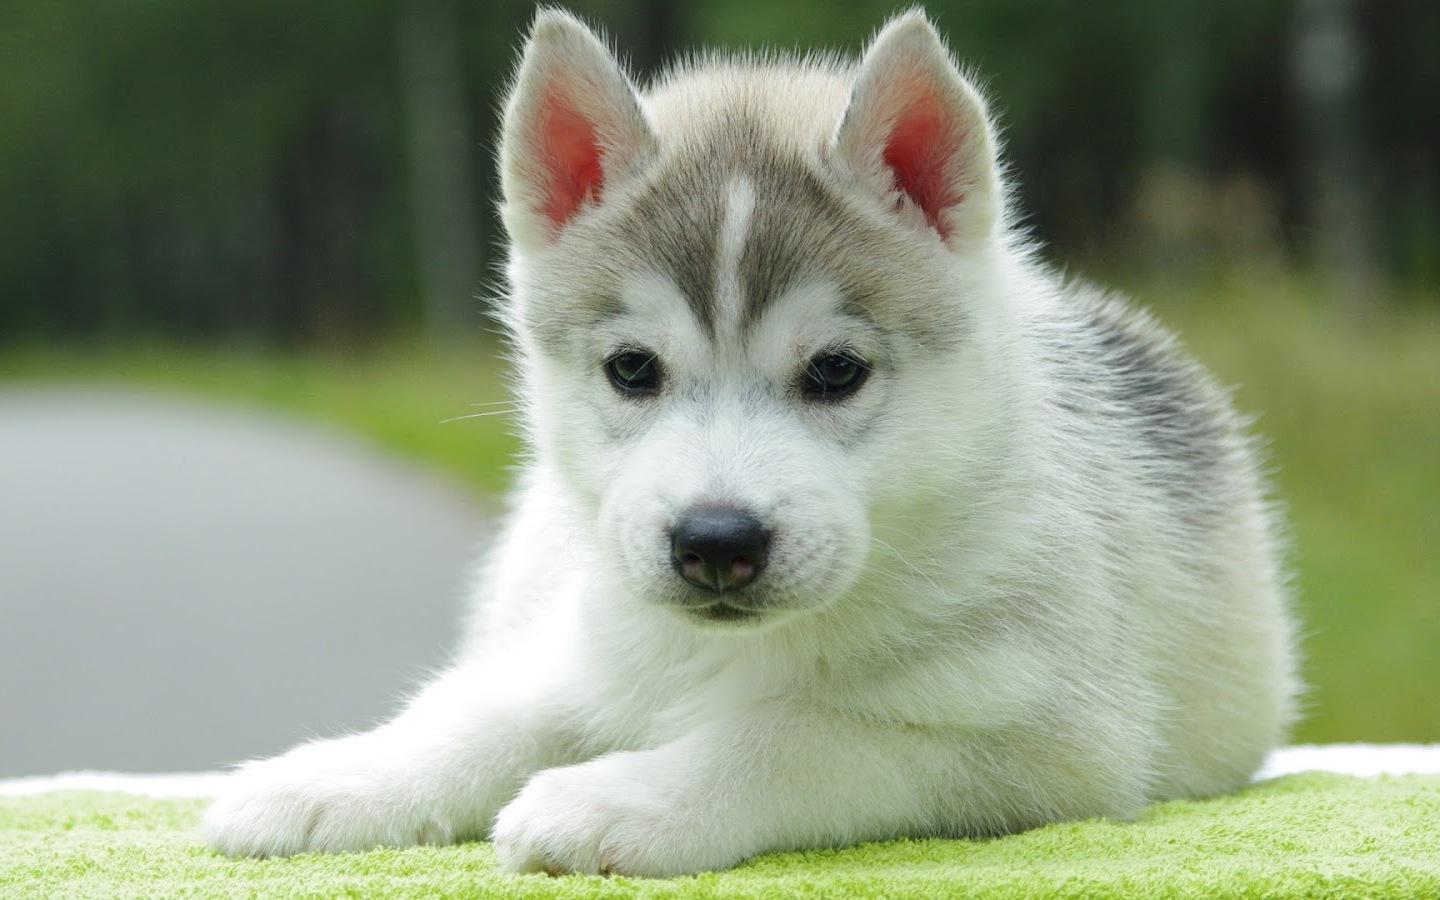 Previous Image Go Back To Cute Puppy Wallpaper For Desktop Mobile